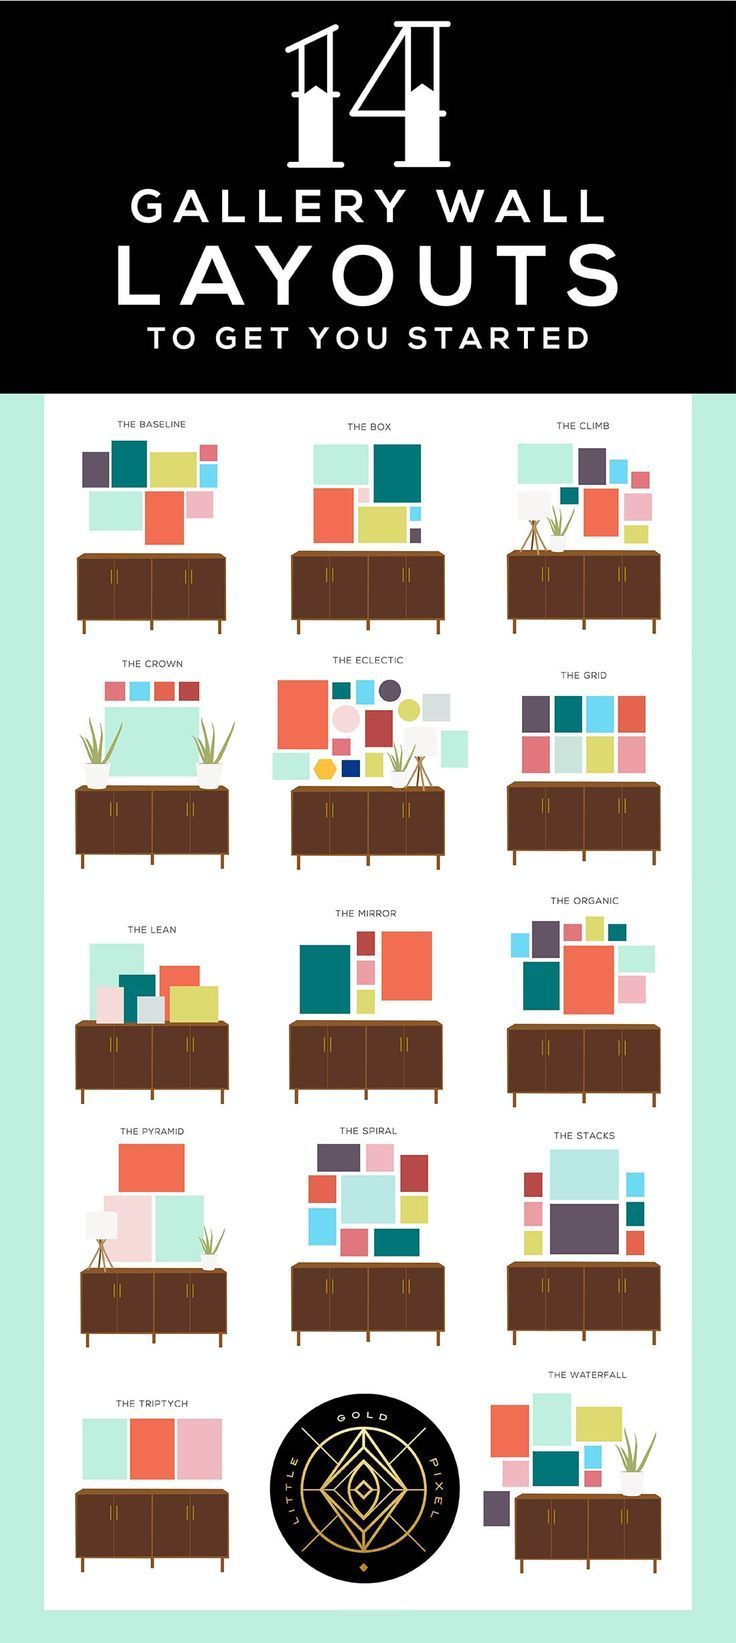 14 Gallery Wall Layouts to Get You Started -   10 room decor Photos layout ideas